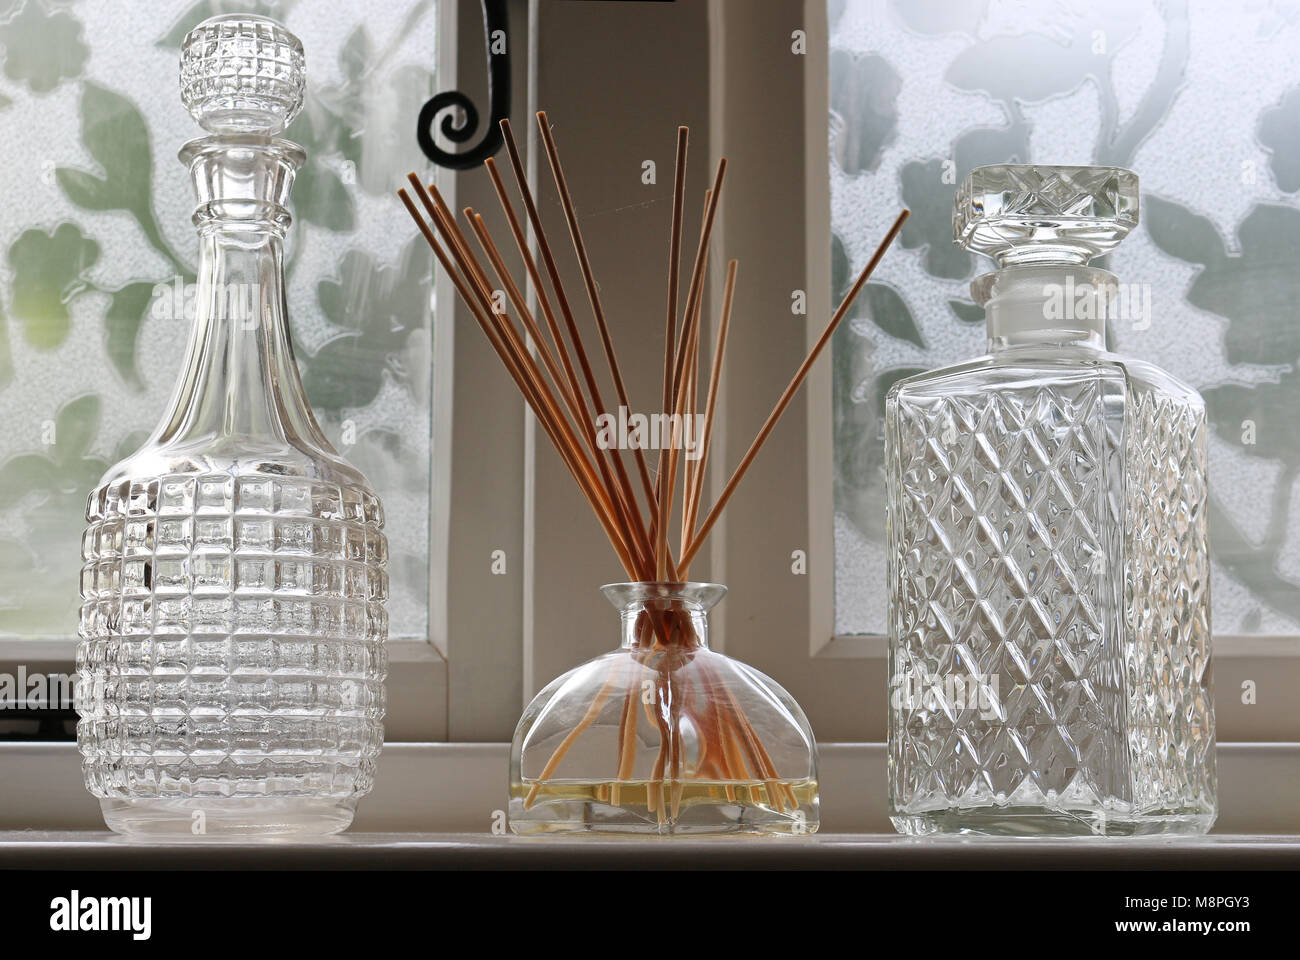 A Reed Diffuser on a windowsill between two decanters Stock Photo